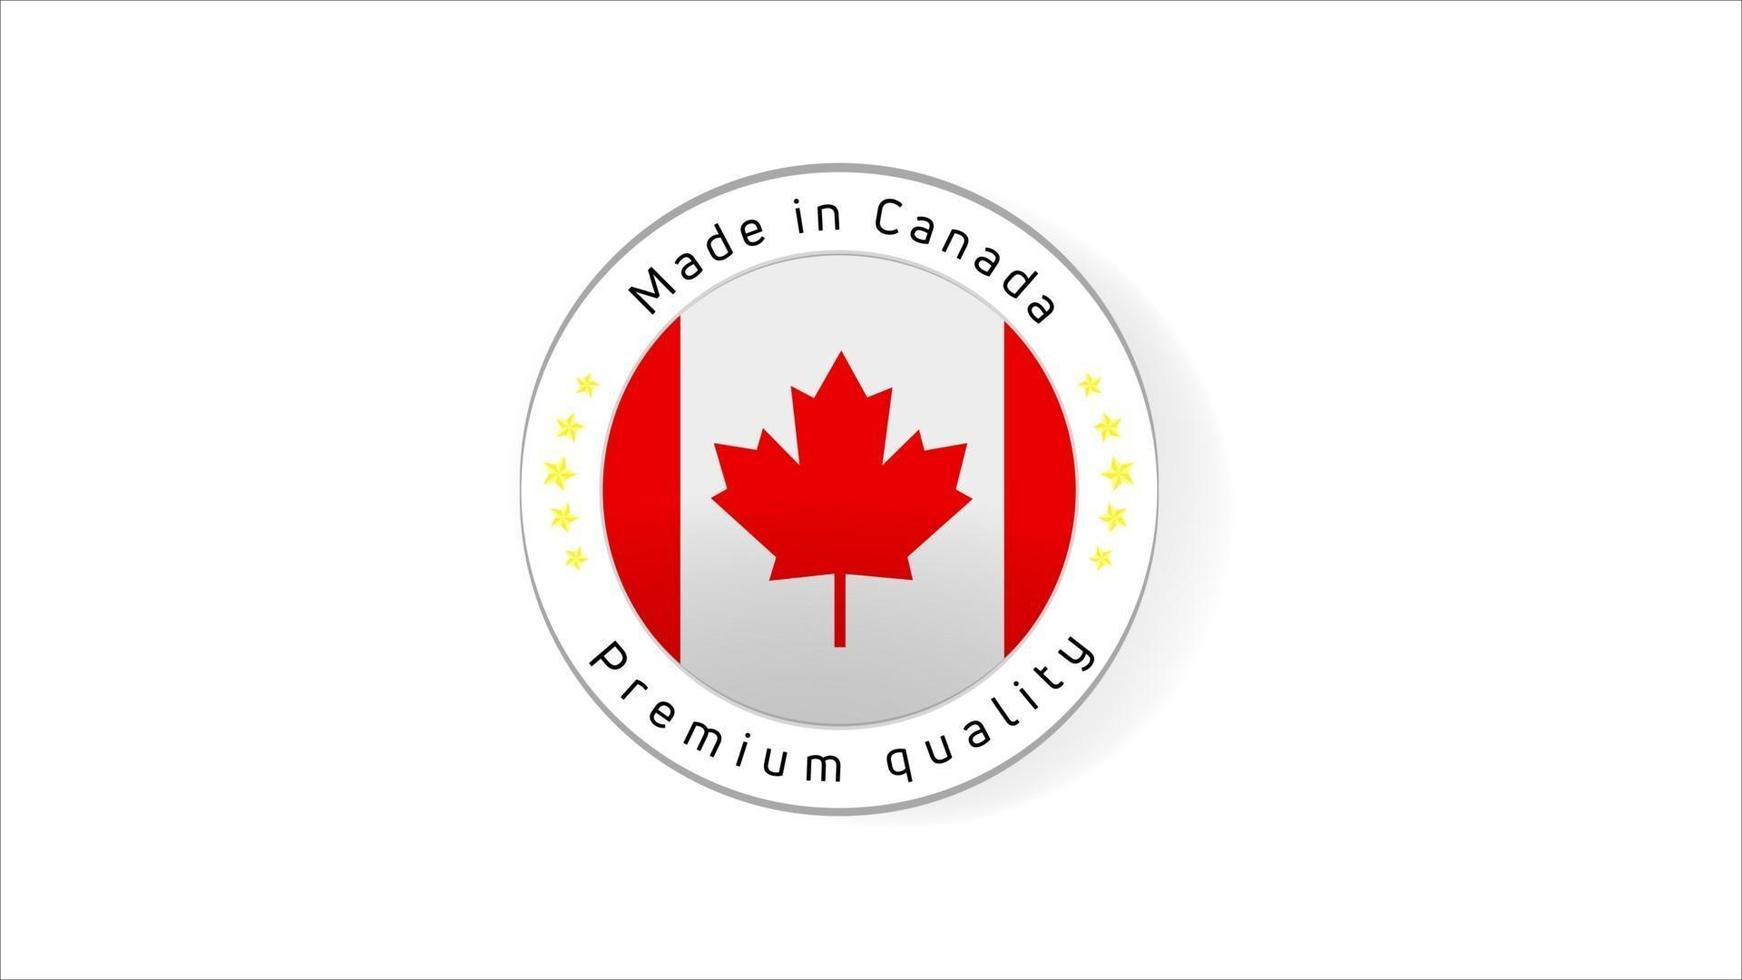 Made in Canada labels. Canada quality stamp. Quality mark vector icon for tags, badges, stickers, emblem, product.